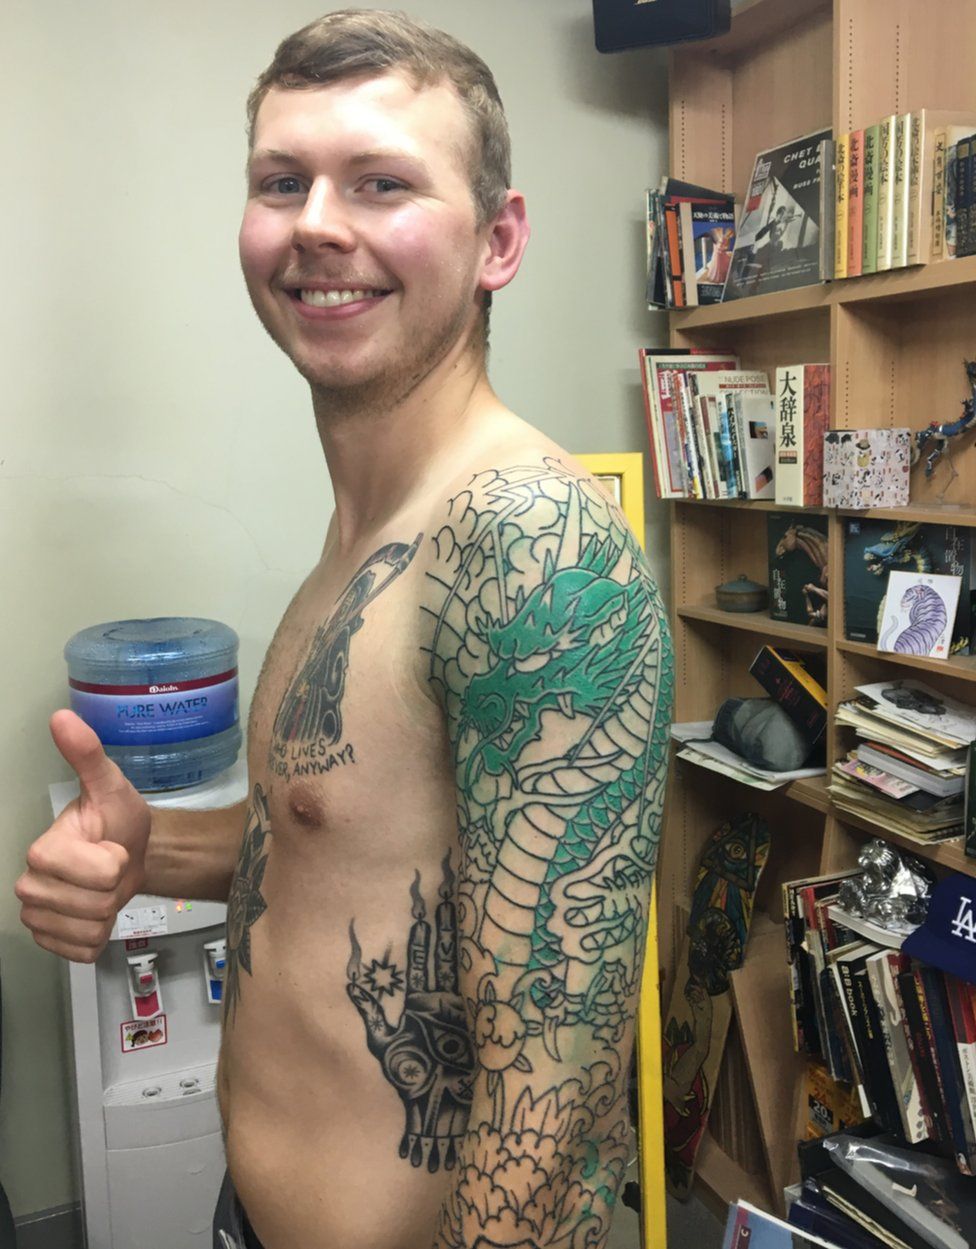 Kyle Seeley smiles and gives a thumbs-up while showing off his new dragon tattoo